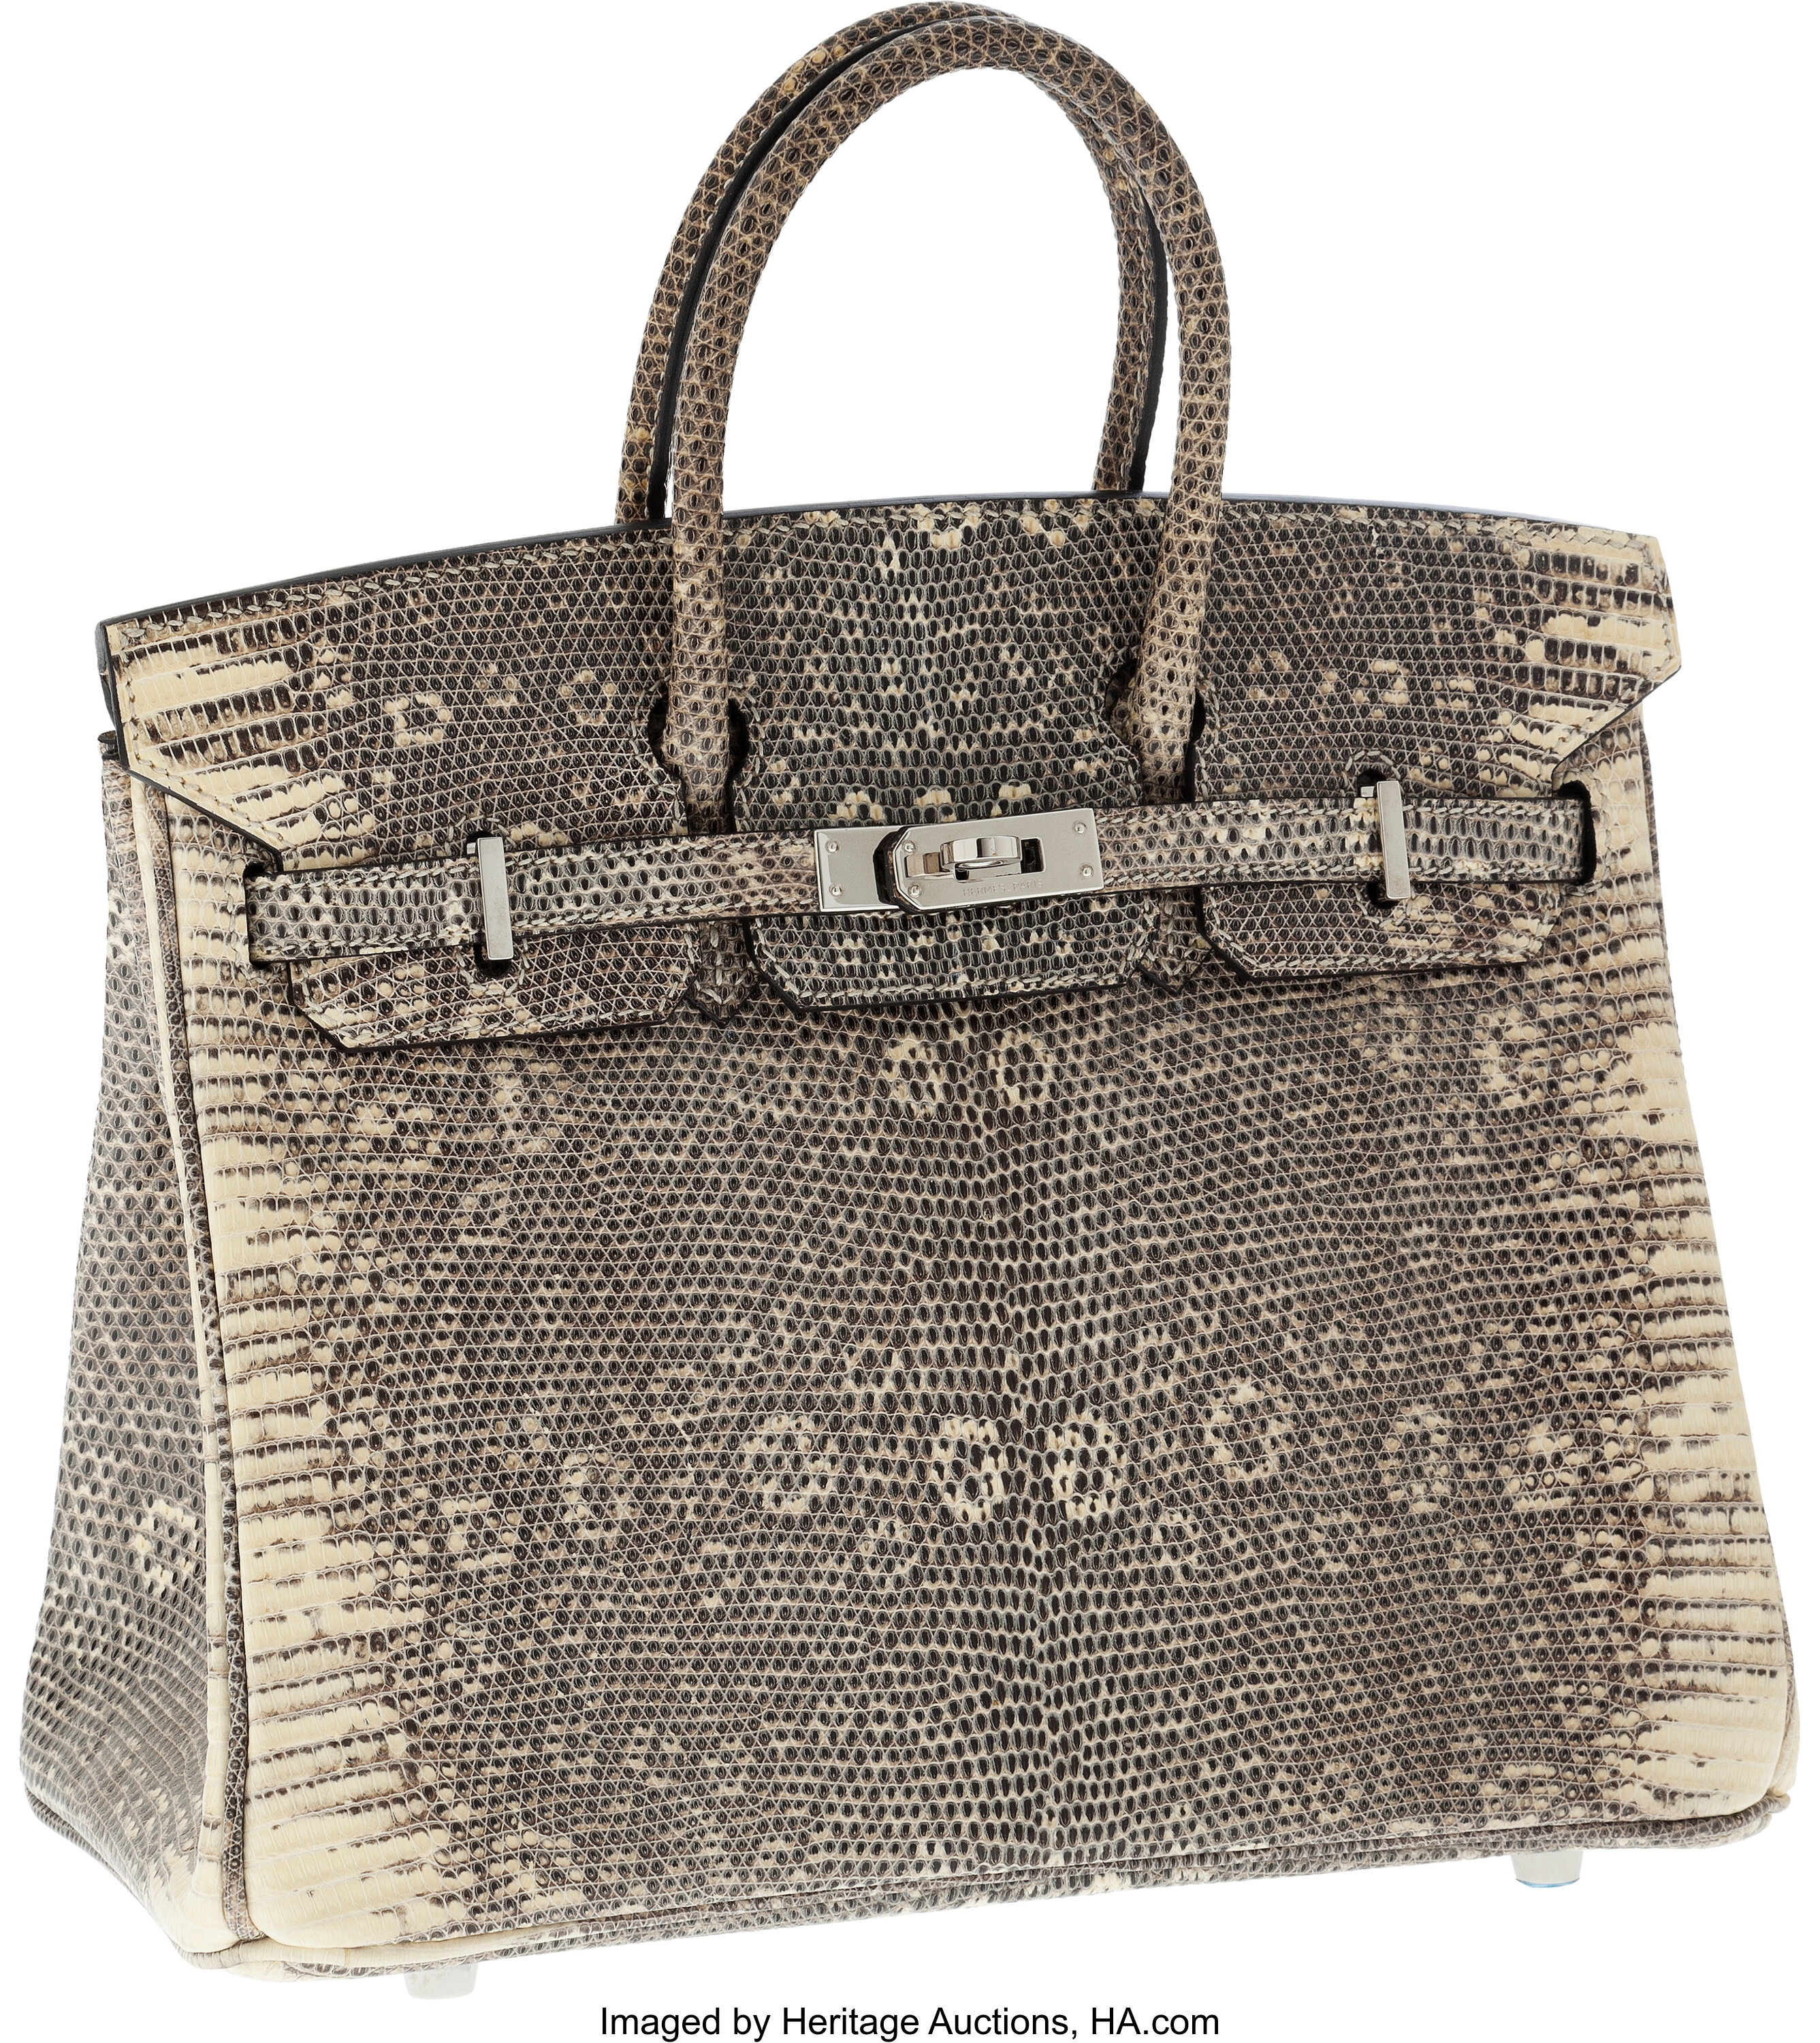 Hermes Birkin 25 Ombre Natural Lizard Available on webstore